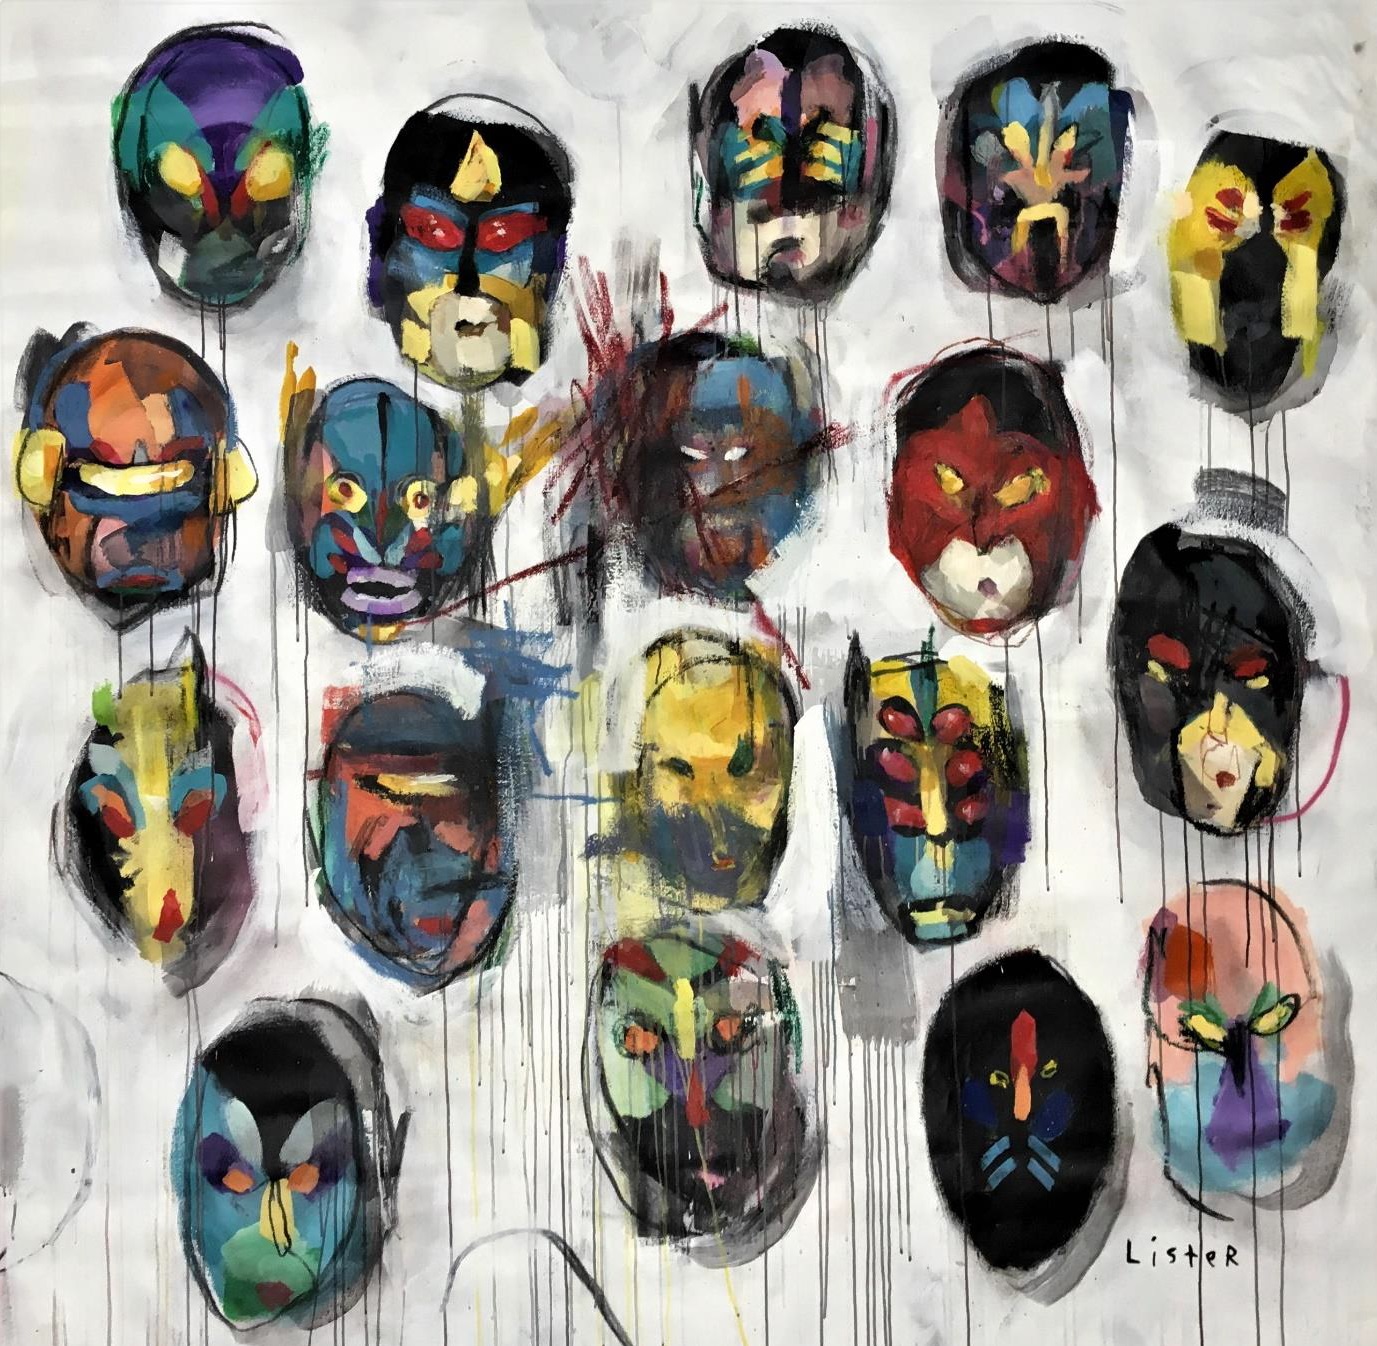 Painted Mask 18 – 2015 | Anthony Lister